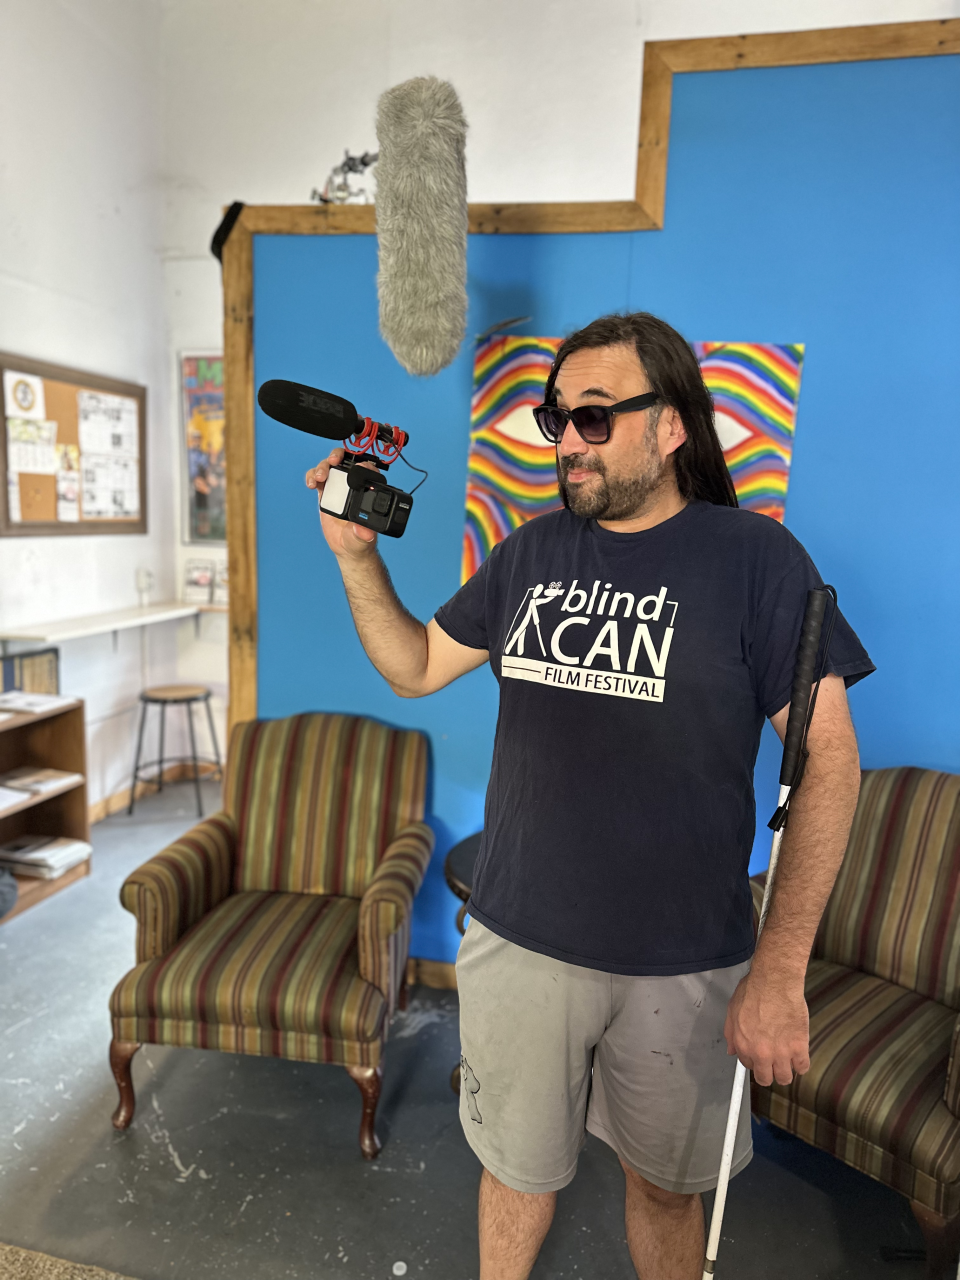 Blind Can founder Ben Fox is organizing the Fourth Annual Blind CAN Film Festival, which will be held in Tallahassee starting with music on April 5 in the Arts District and a day of free films at the Challenger Learning Center on Saturday, April 6, 2024.